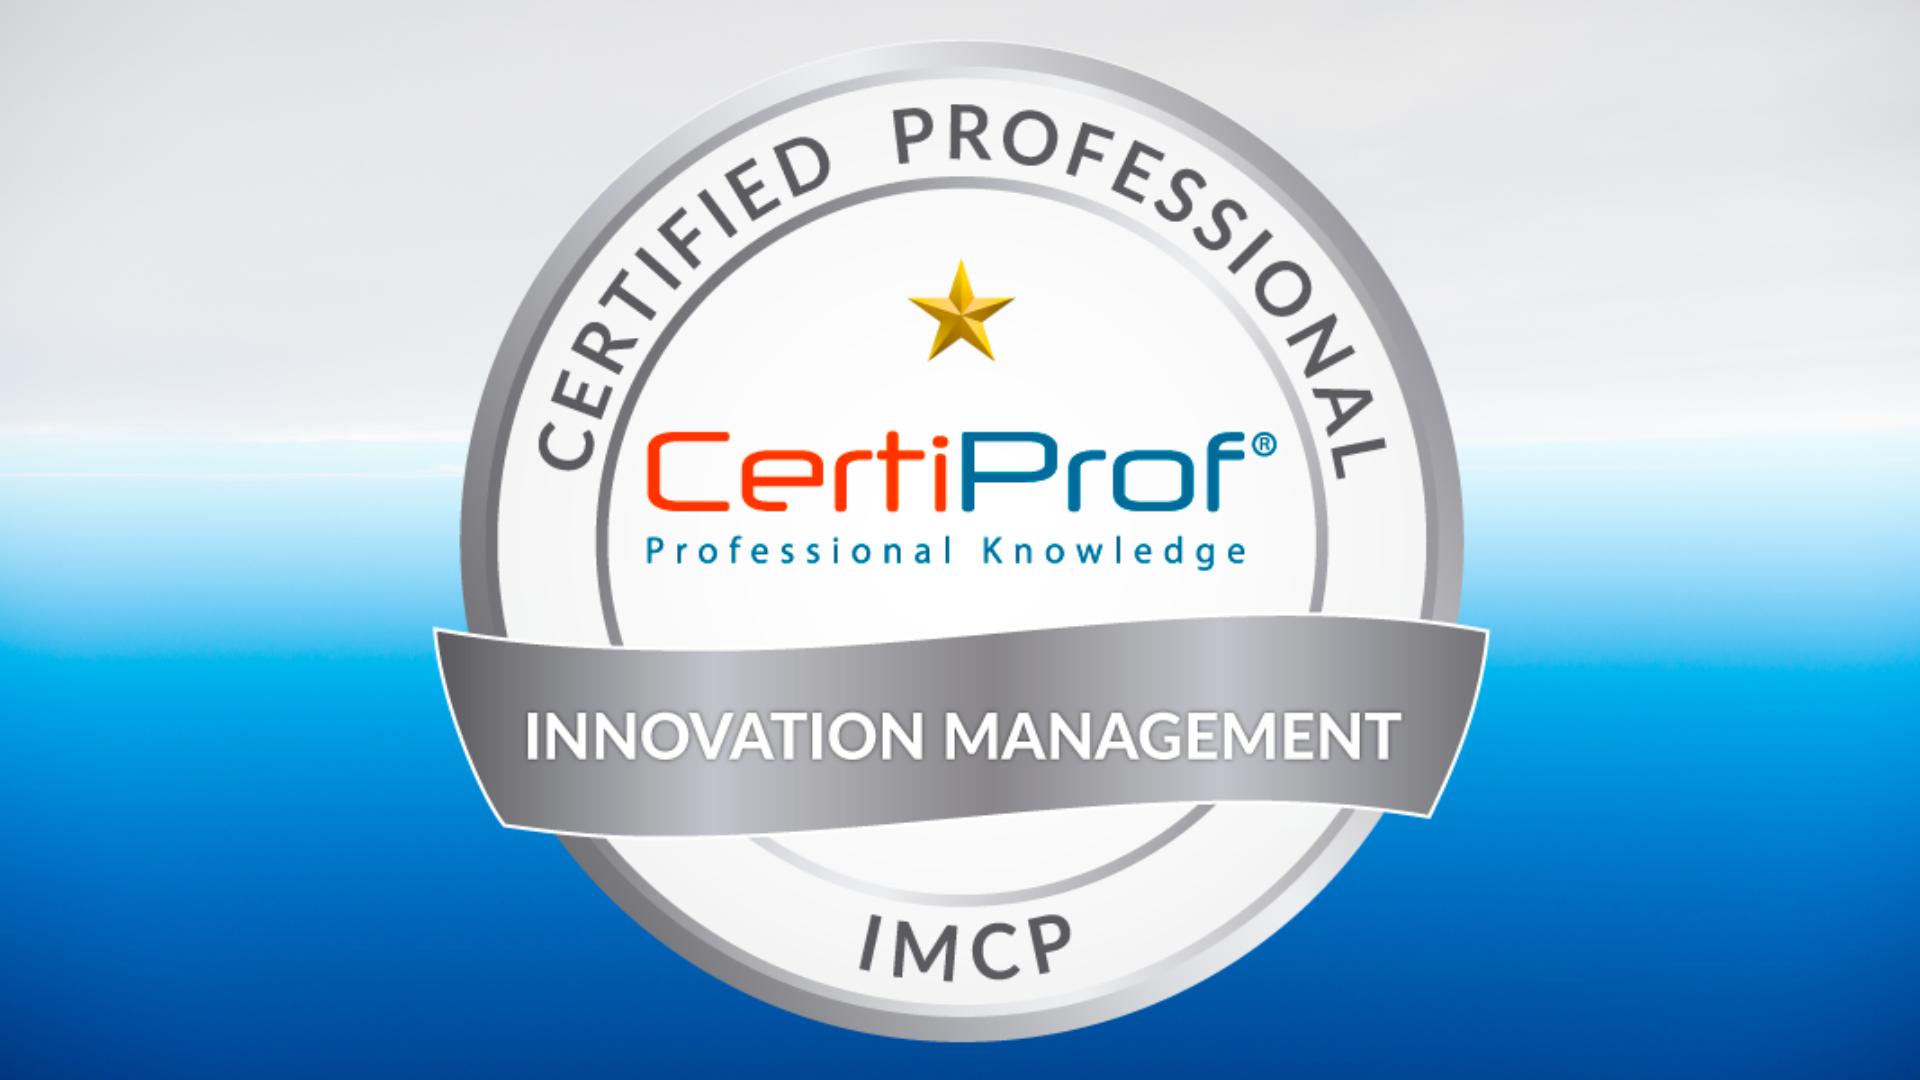 Innovation Management Certified Professional - IMCP™